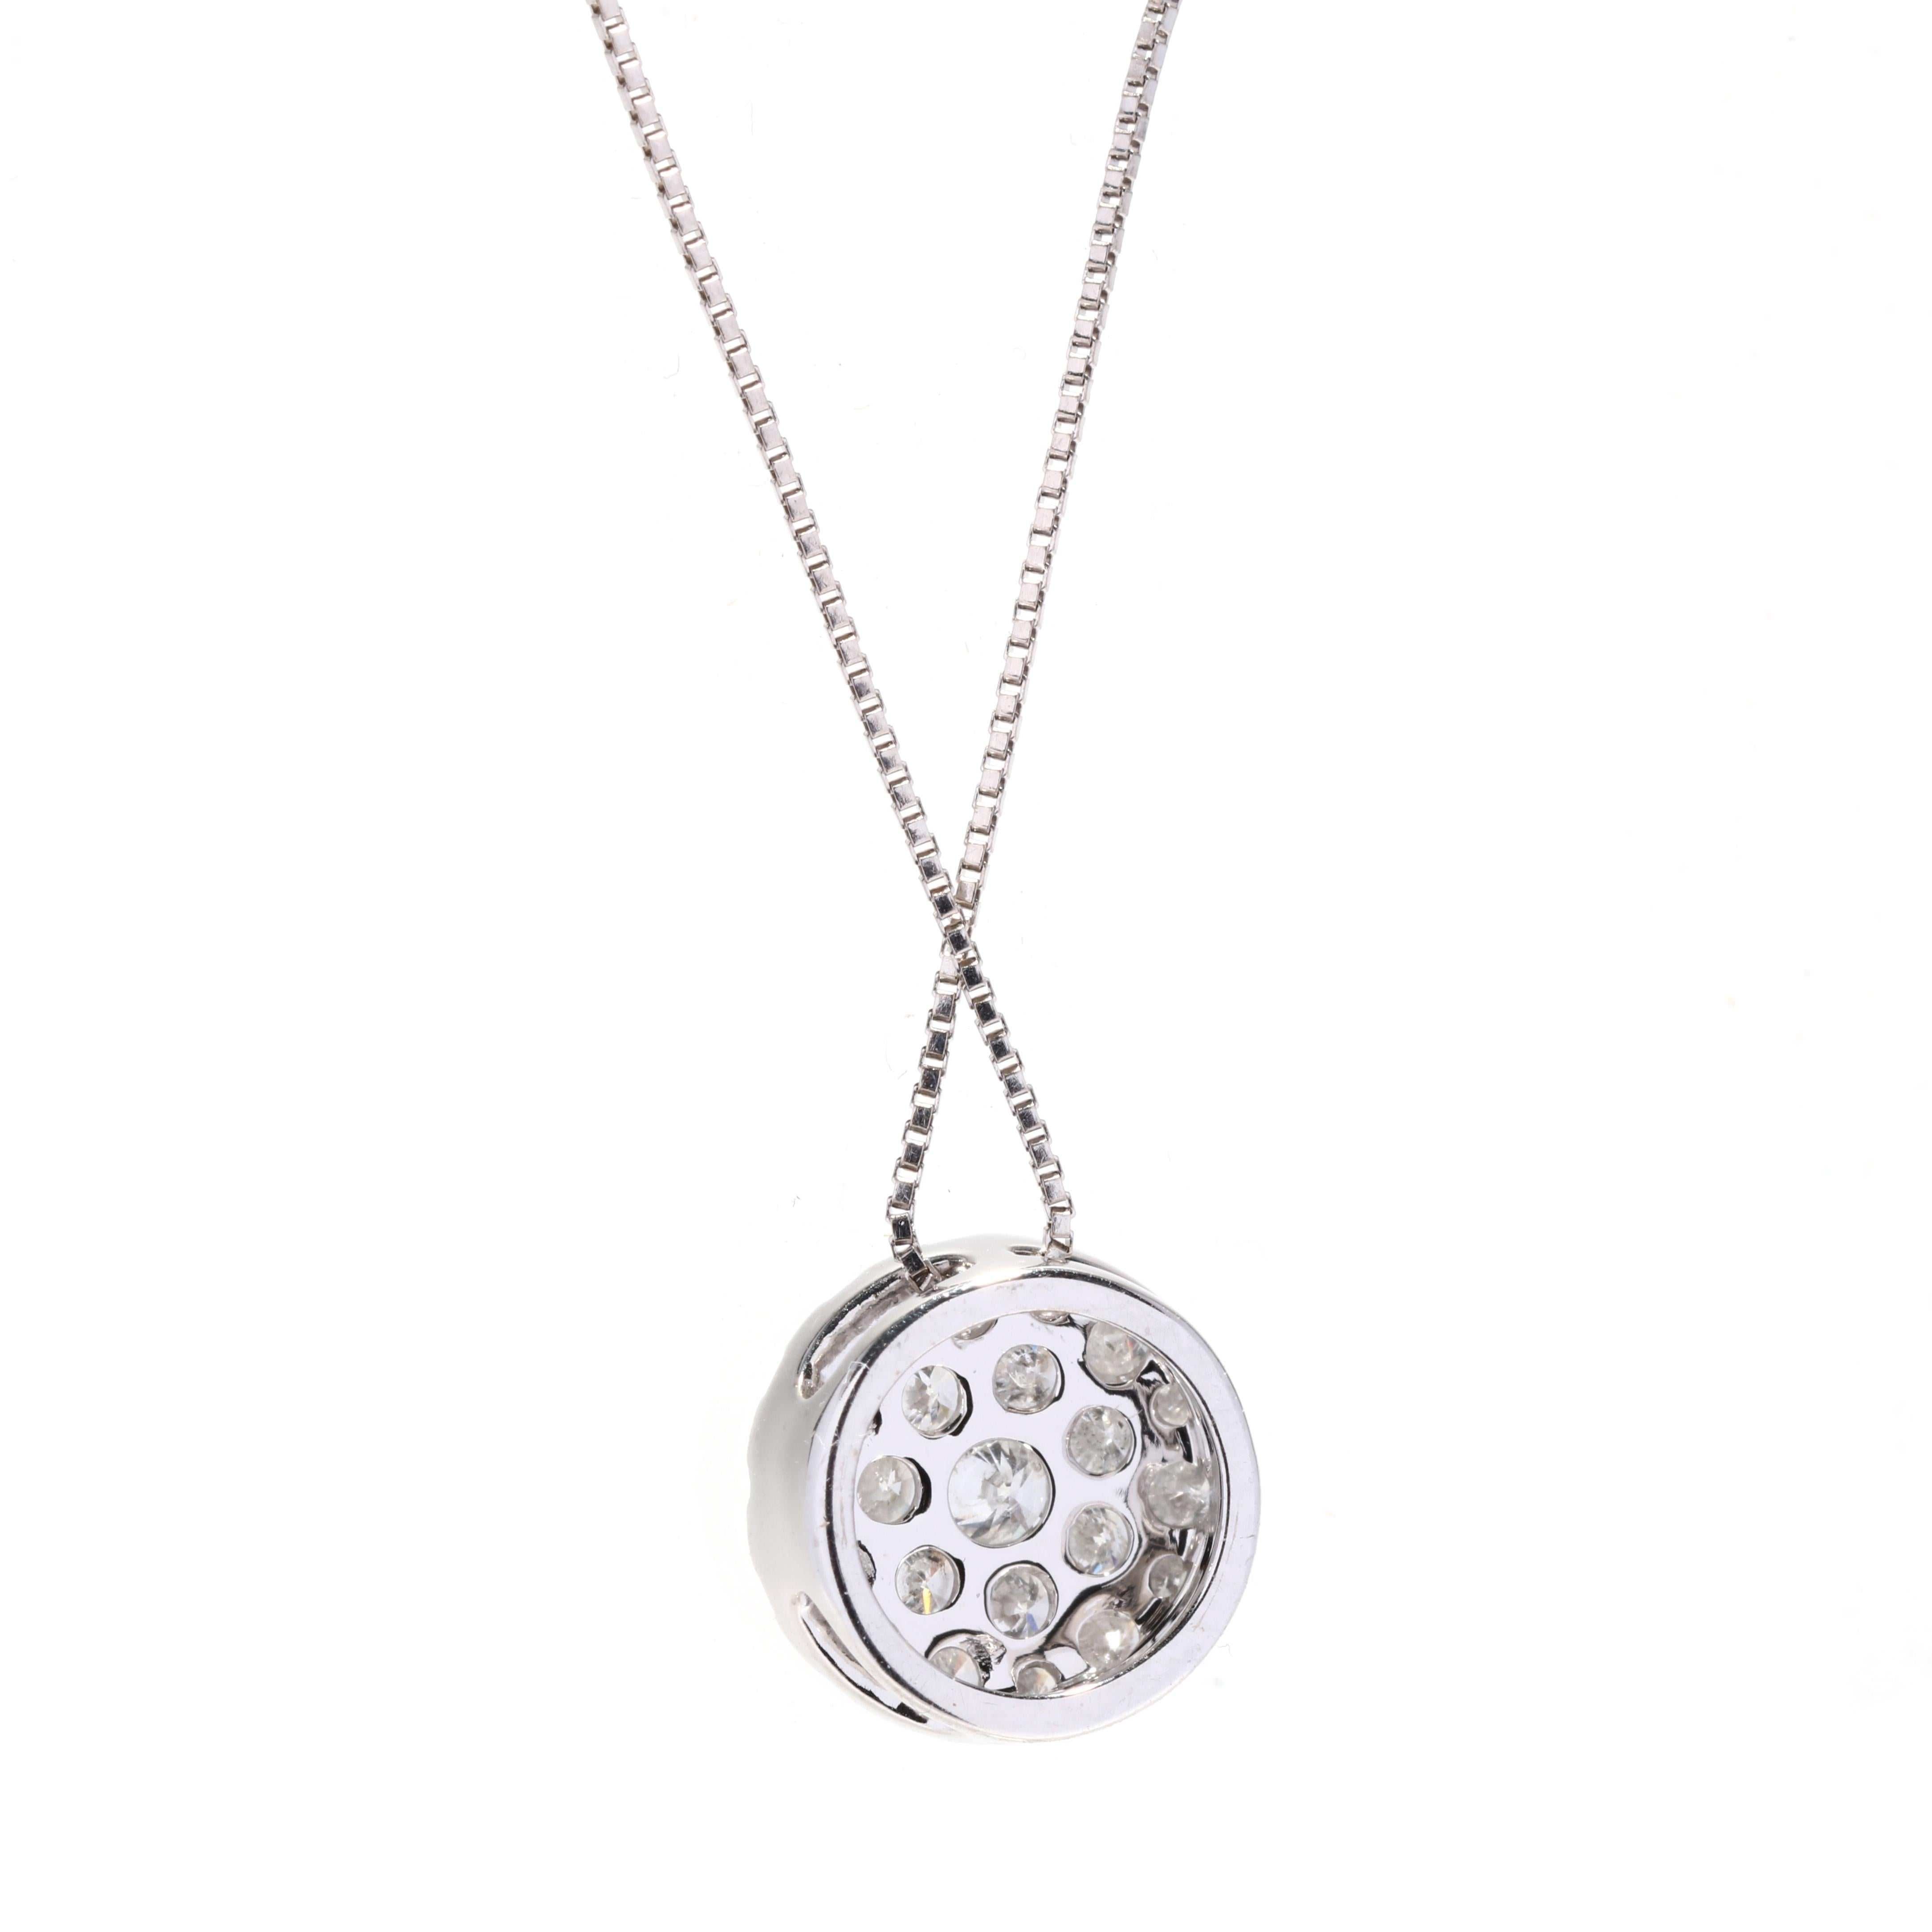 A 10 karat white gold round diamond cluster pendant necklace. This simple diamond pendant features a round design with pavé set round brilliant cut diamonds weighing approximately .40 total carats and suspended from a thin box chain.

Stones: 
-